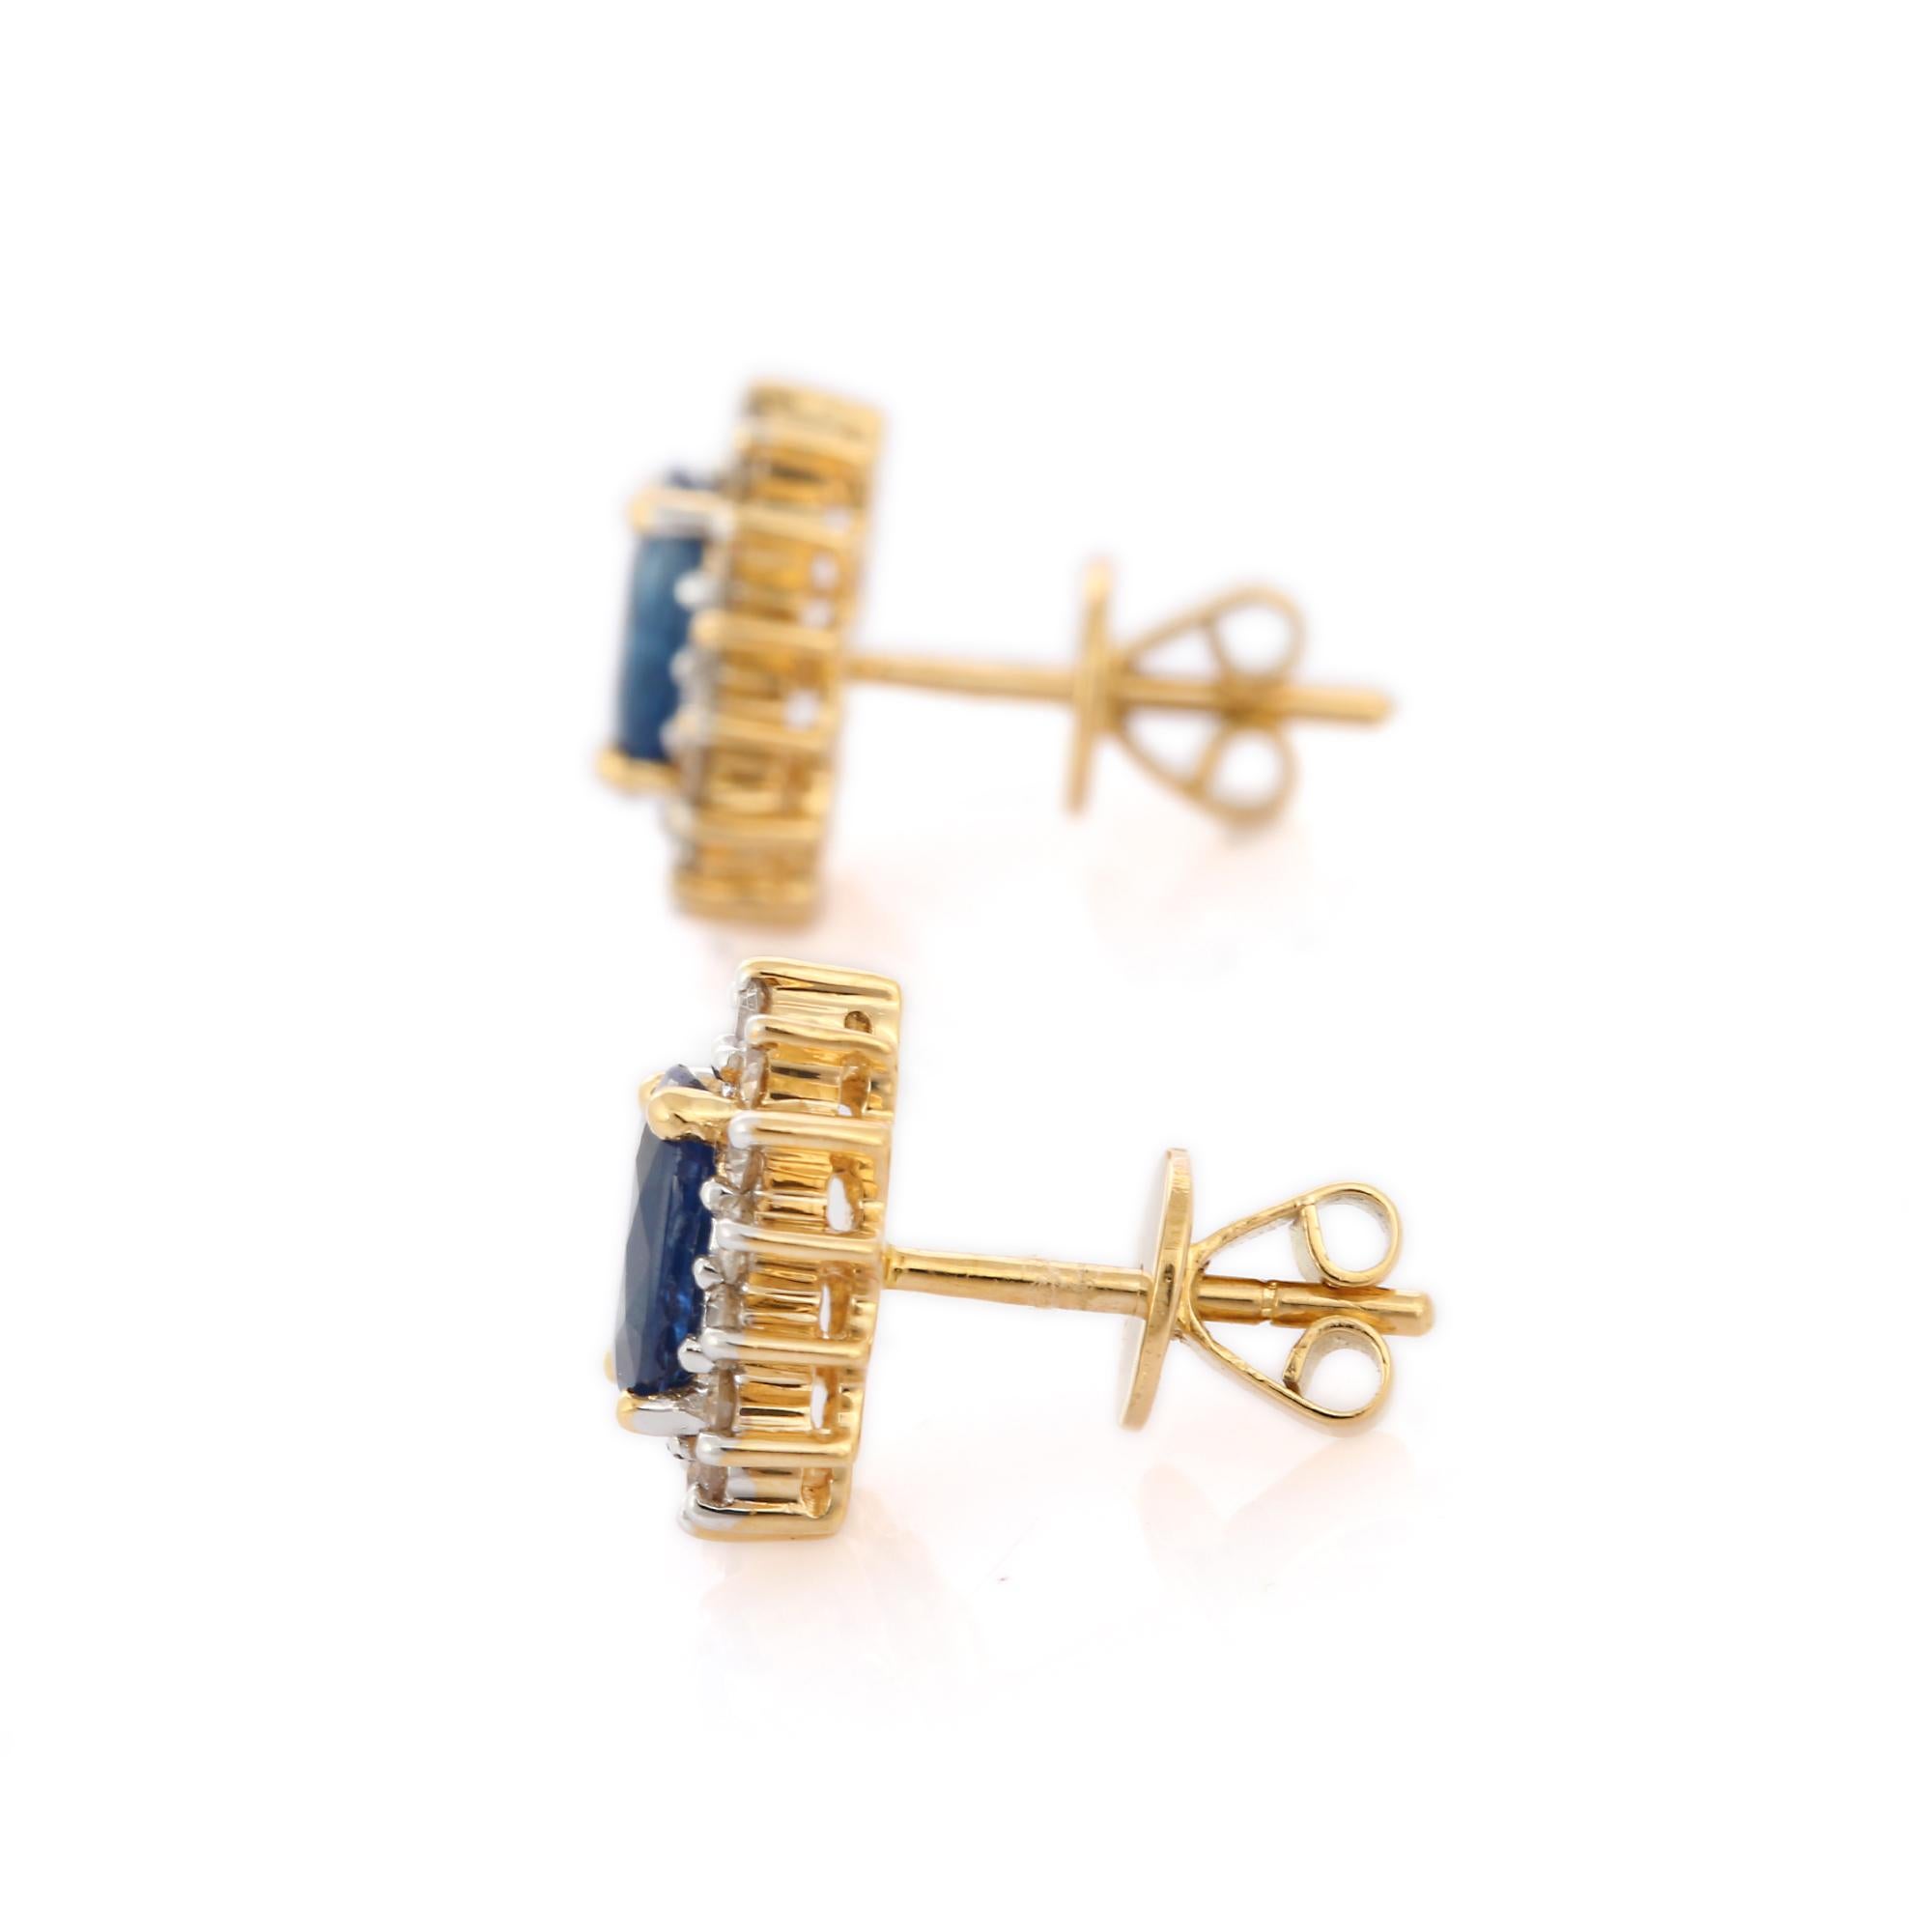 Oval Cut 1.58 Carat Blue Sapphire and Diamond Earrings Studded in 18K Solid Yellow Gold For Sale